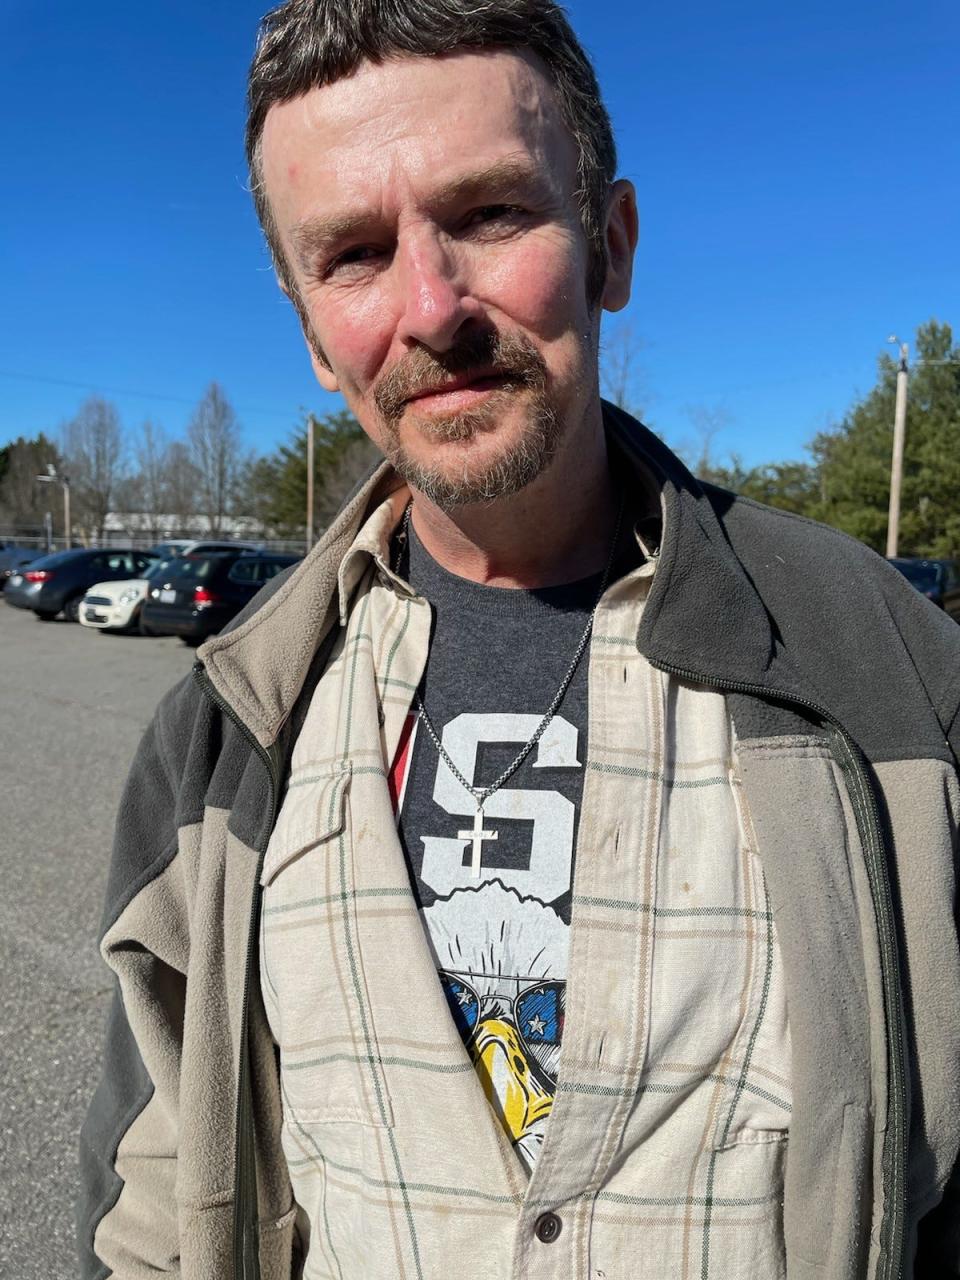 Scotty Garrett, Cody Garrett's father, donned a cross necklace with his son's name engraved on the cross during the court appearance of Richard Towe, who plead guilty to second-degree murder in Cody Garrett's homicide.